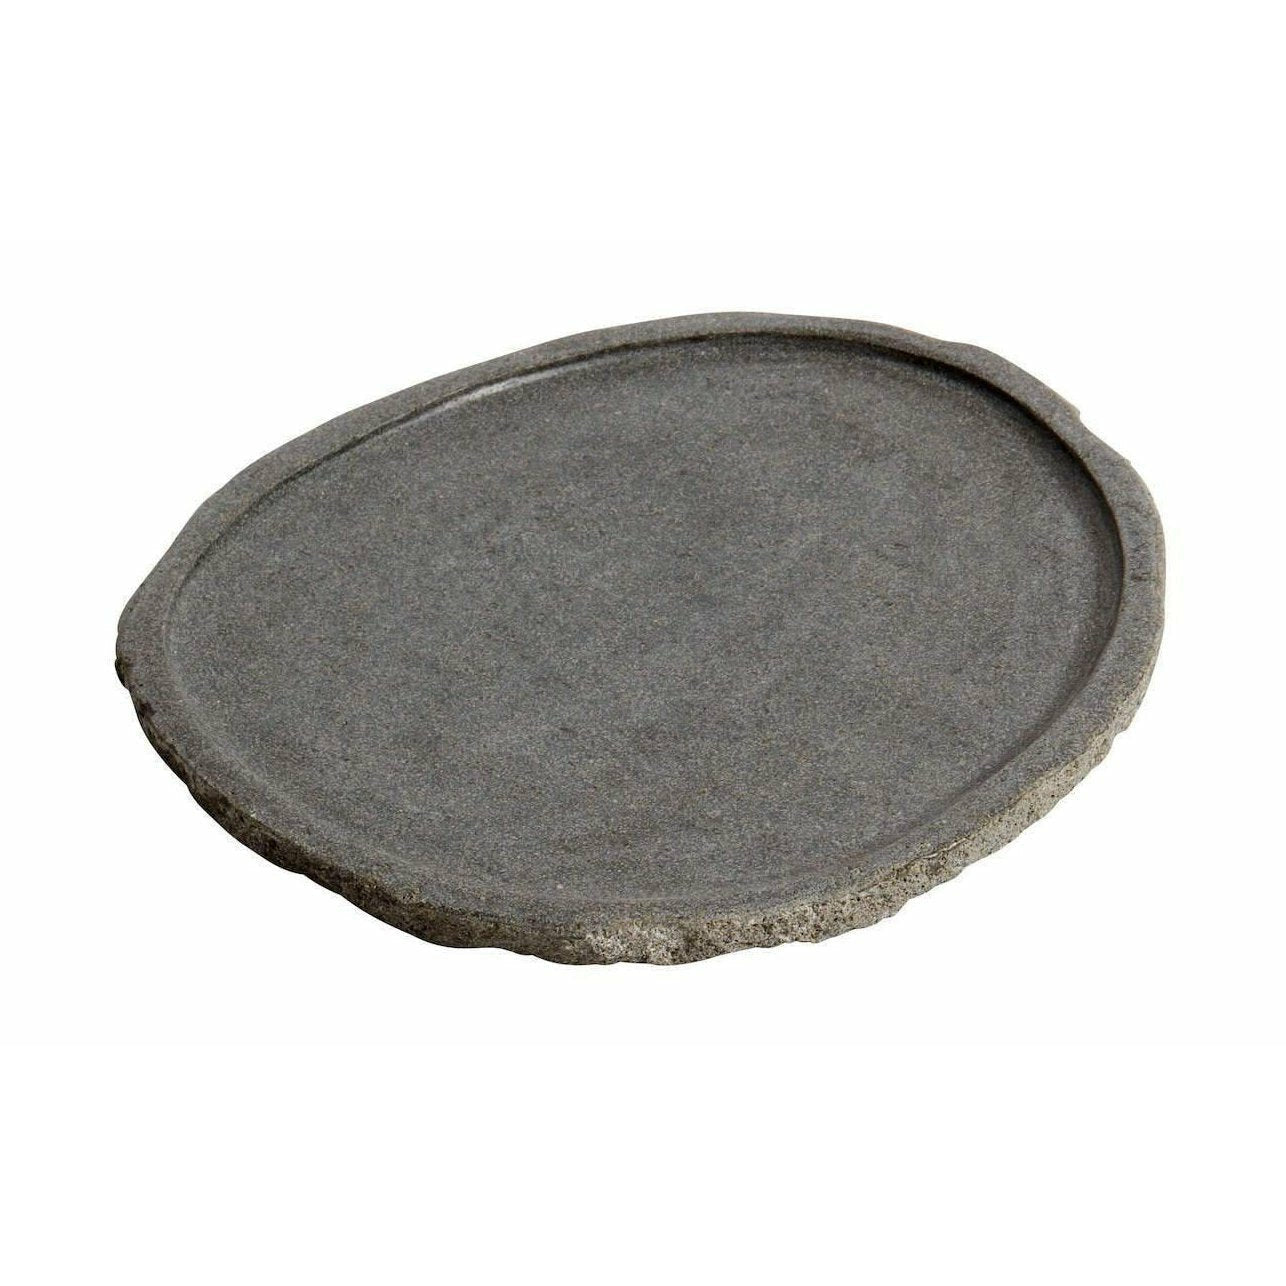 Muubs Valley Fad Riverstone, 40cm